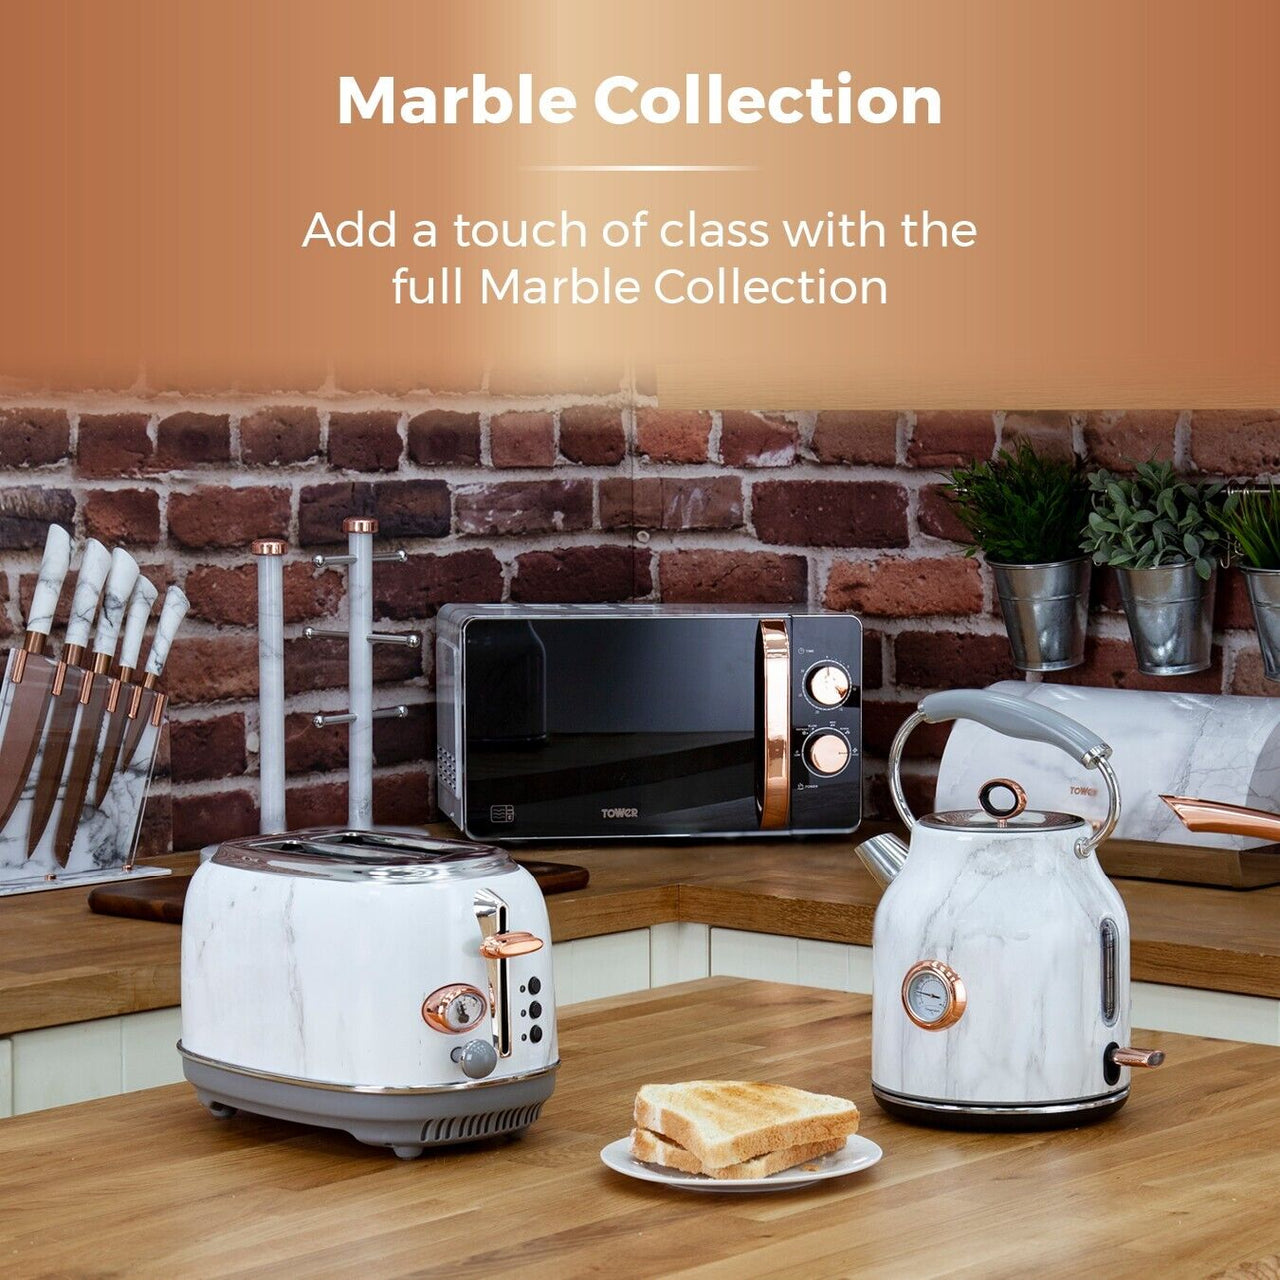 Tower Marble Kettle 2 Slice Toaster Microwave Kitchen Accessories Set - 11 Items